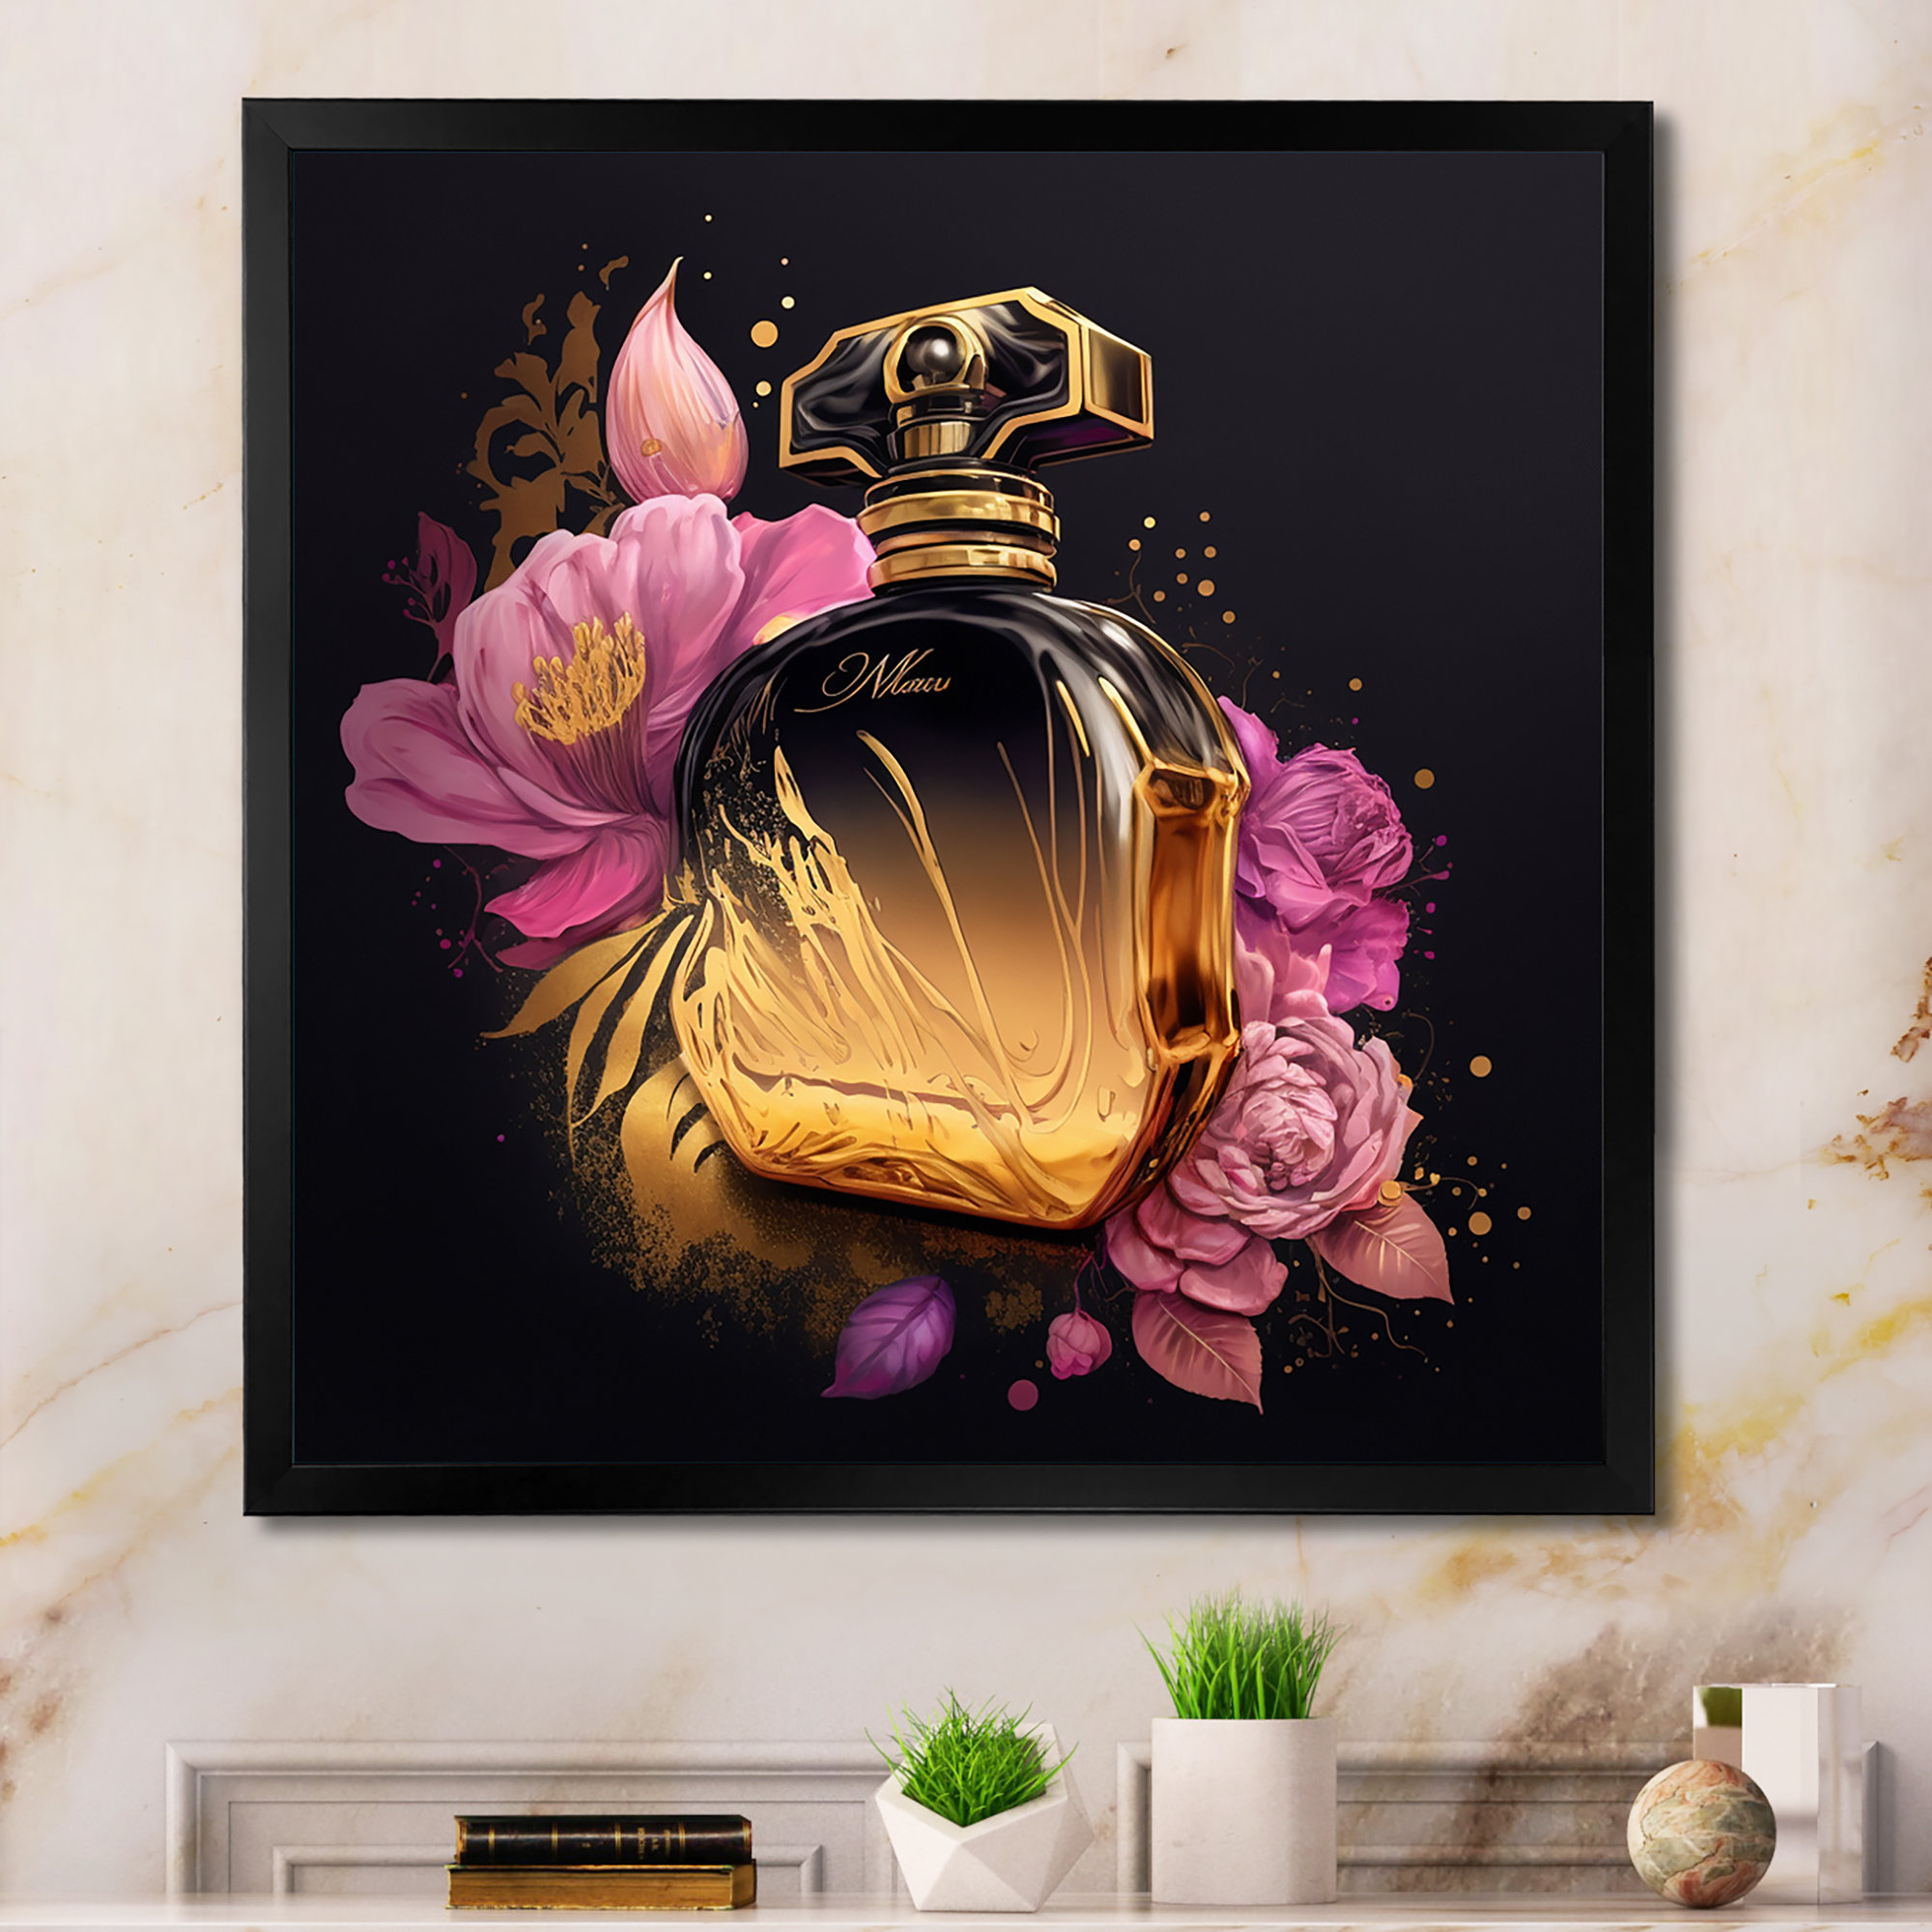 Chic Black and Gold Perfume Bottle V - Graphic Art on Canvas House of Hampton Format: Gold Floater Framed, Size: 36 H x 36 W x 1.5 D